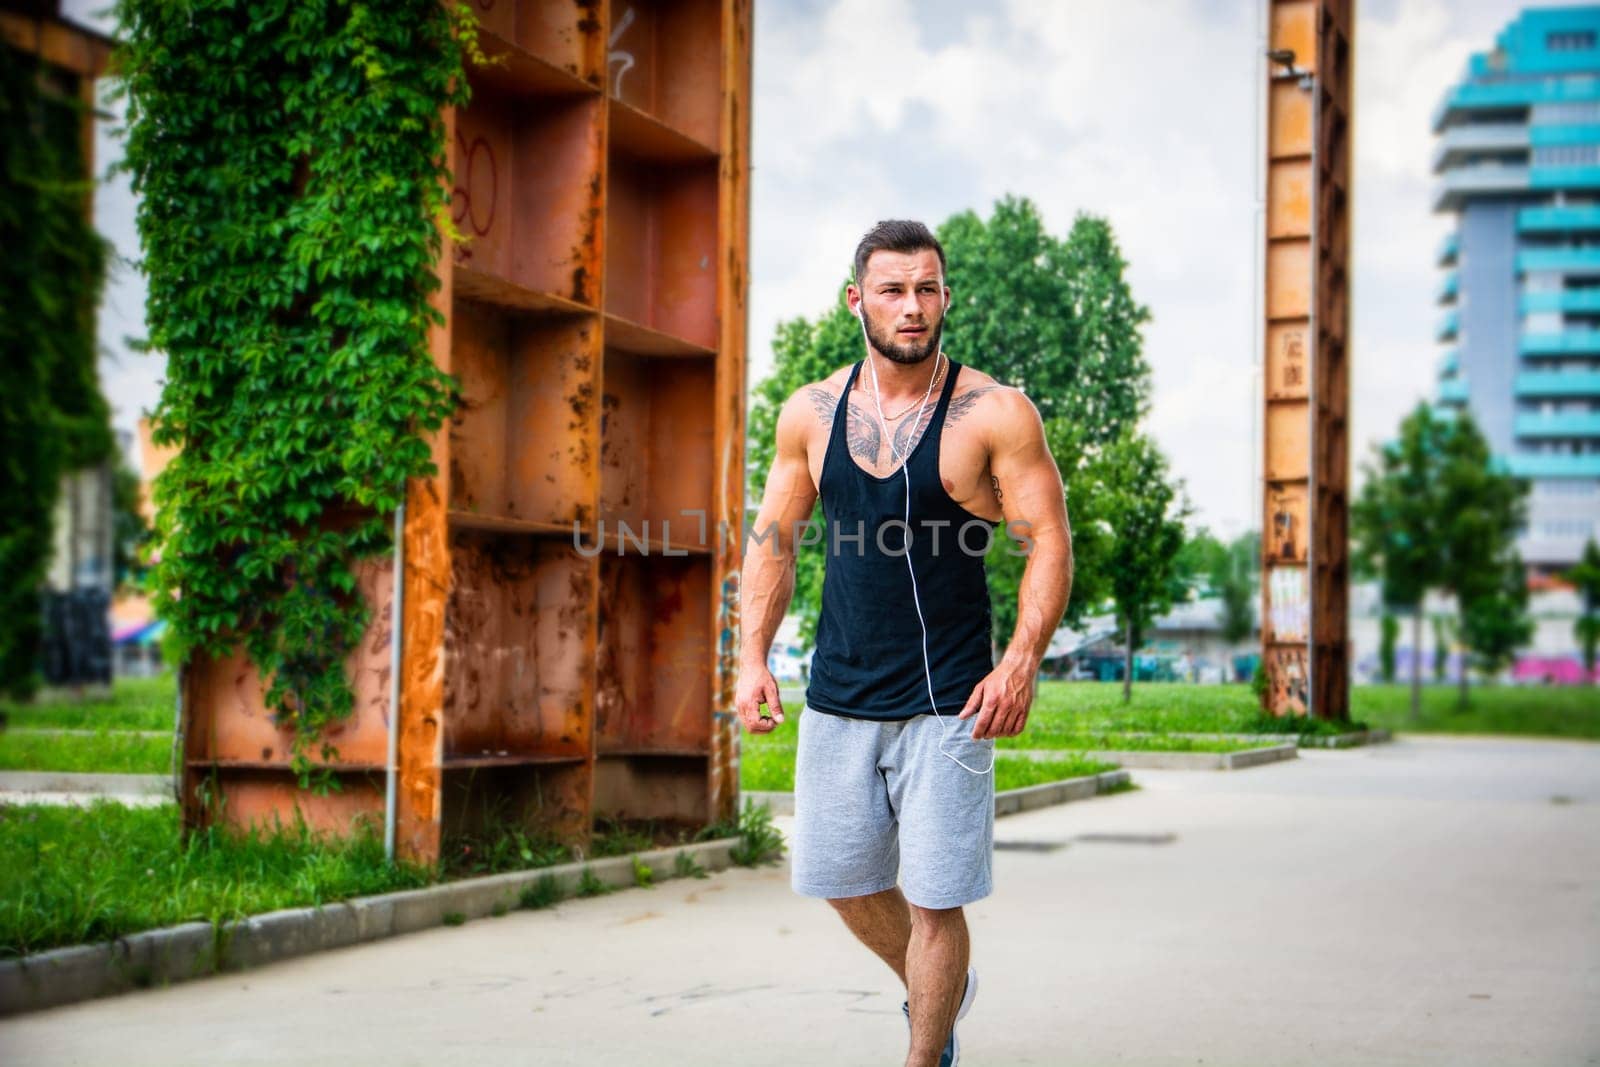 Handsome muscular athletic man running and jogging in city park during the day, wearing black tank top